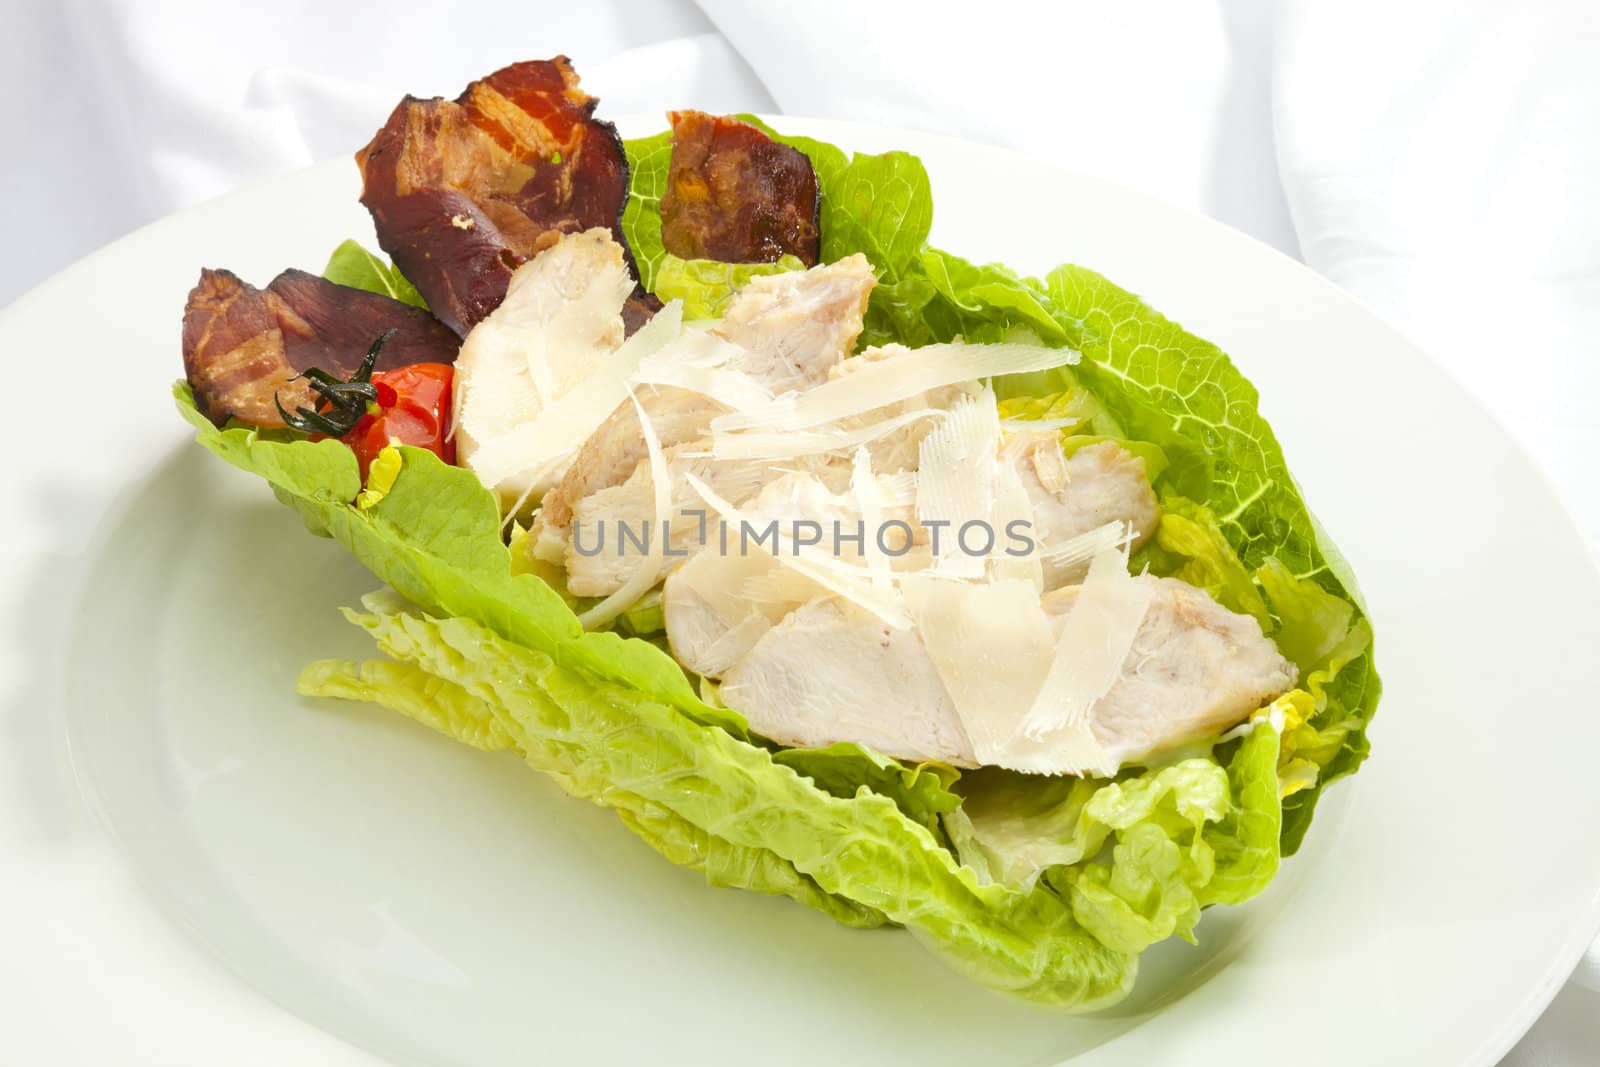 Salad Caesar with pieces of chicken and parmesan